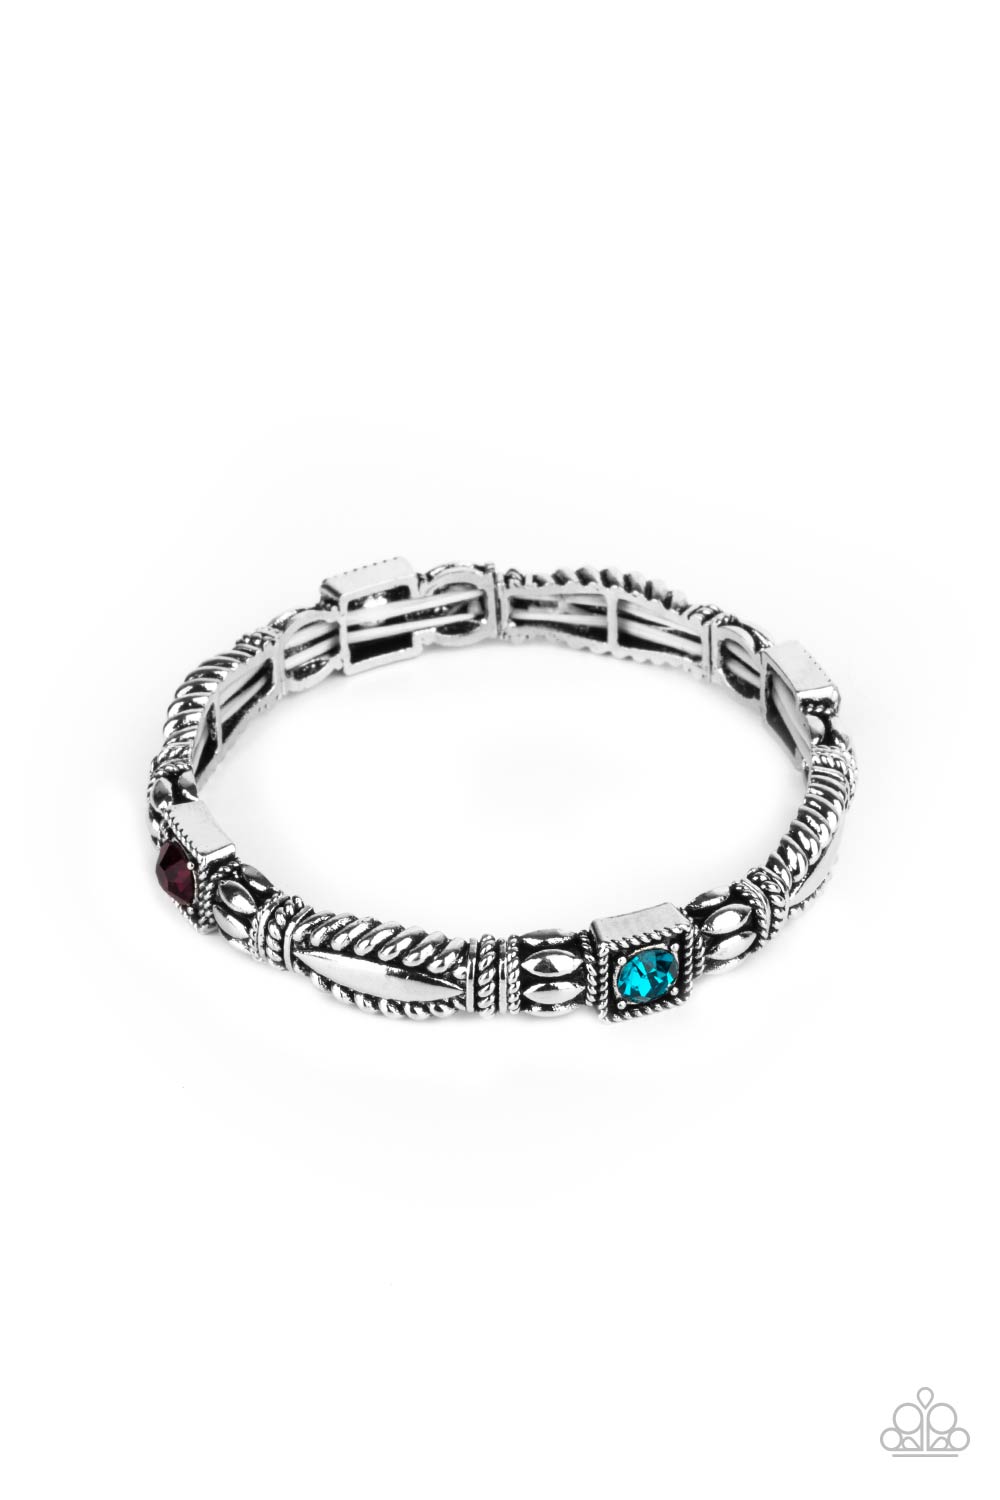 Get This GLOW On The Road Multi-Bracelet